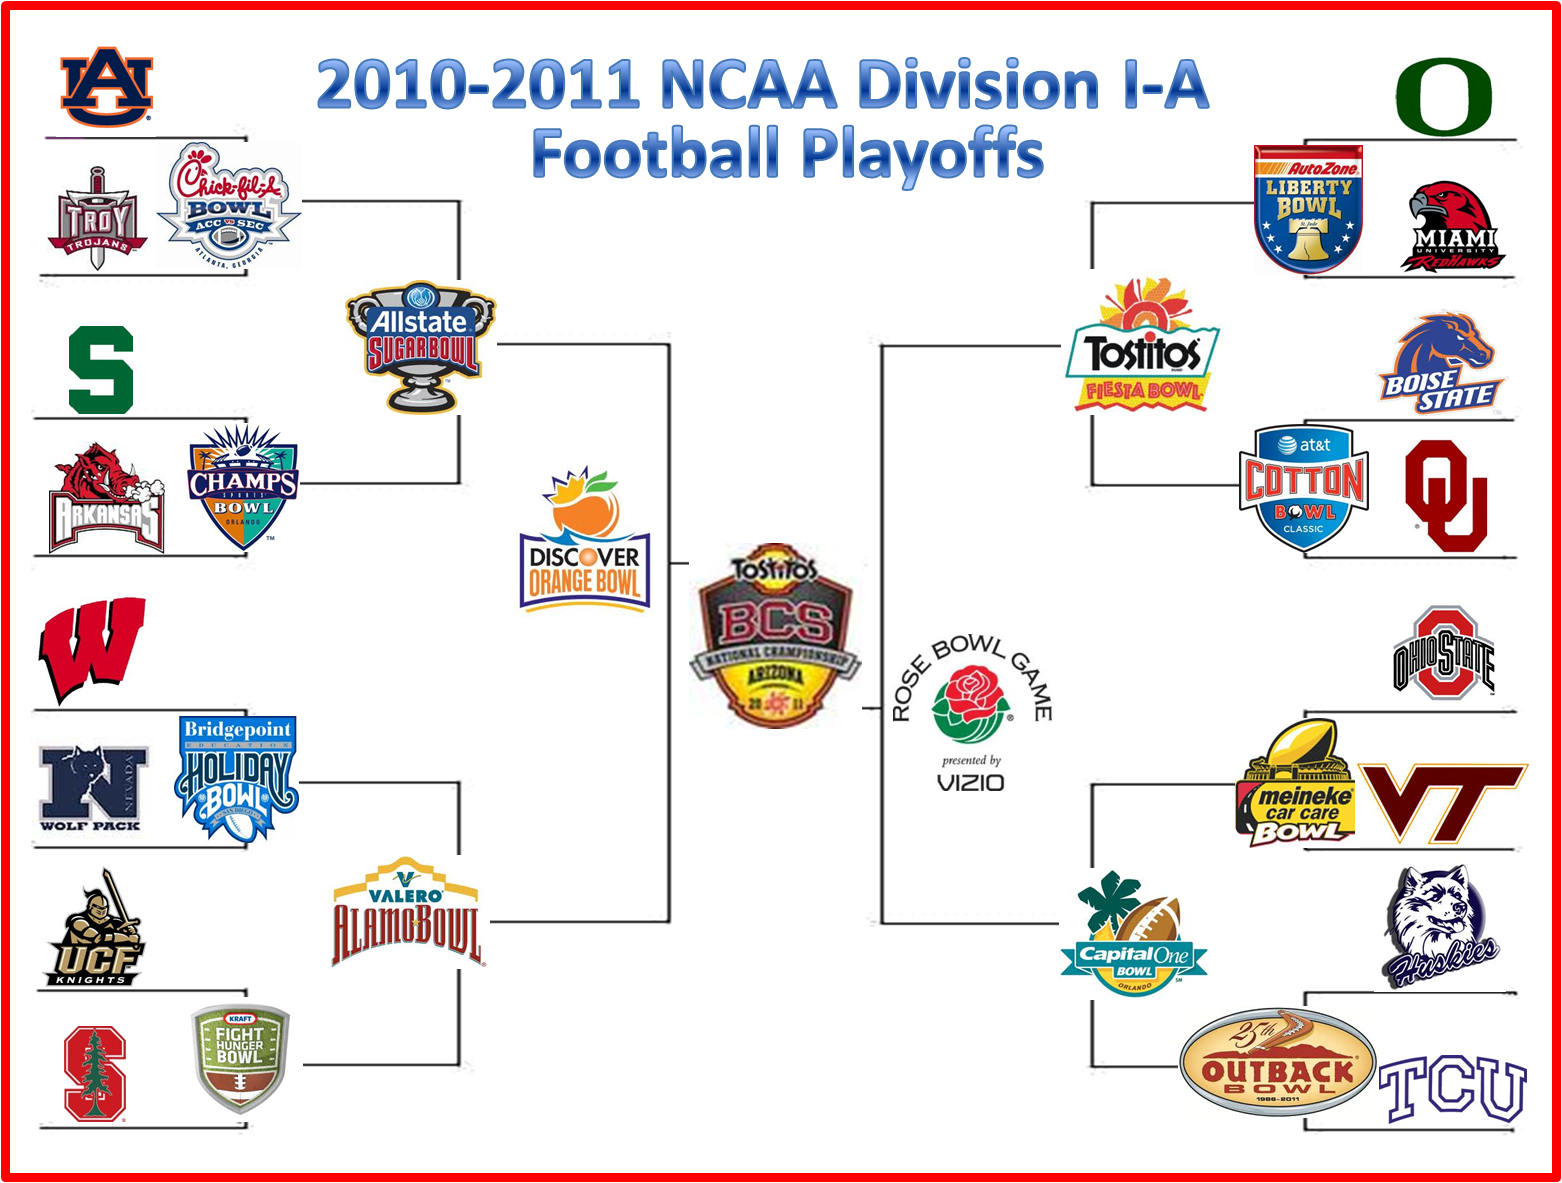 Punting On Third: 2010-2011 NCAA Division I-A Football Playoff Bracket